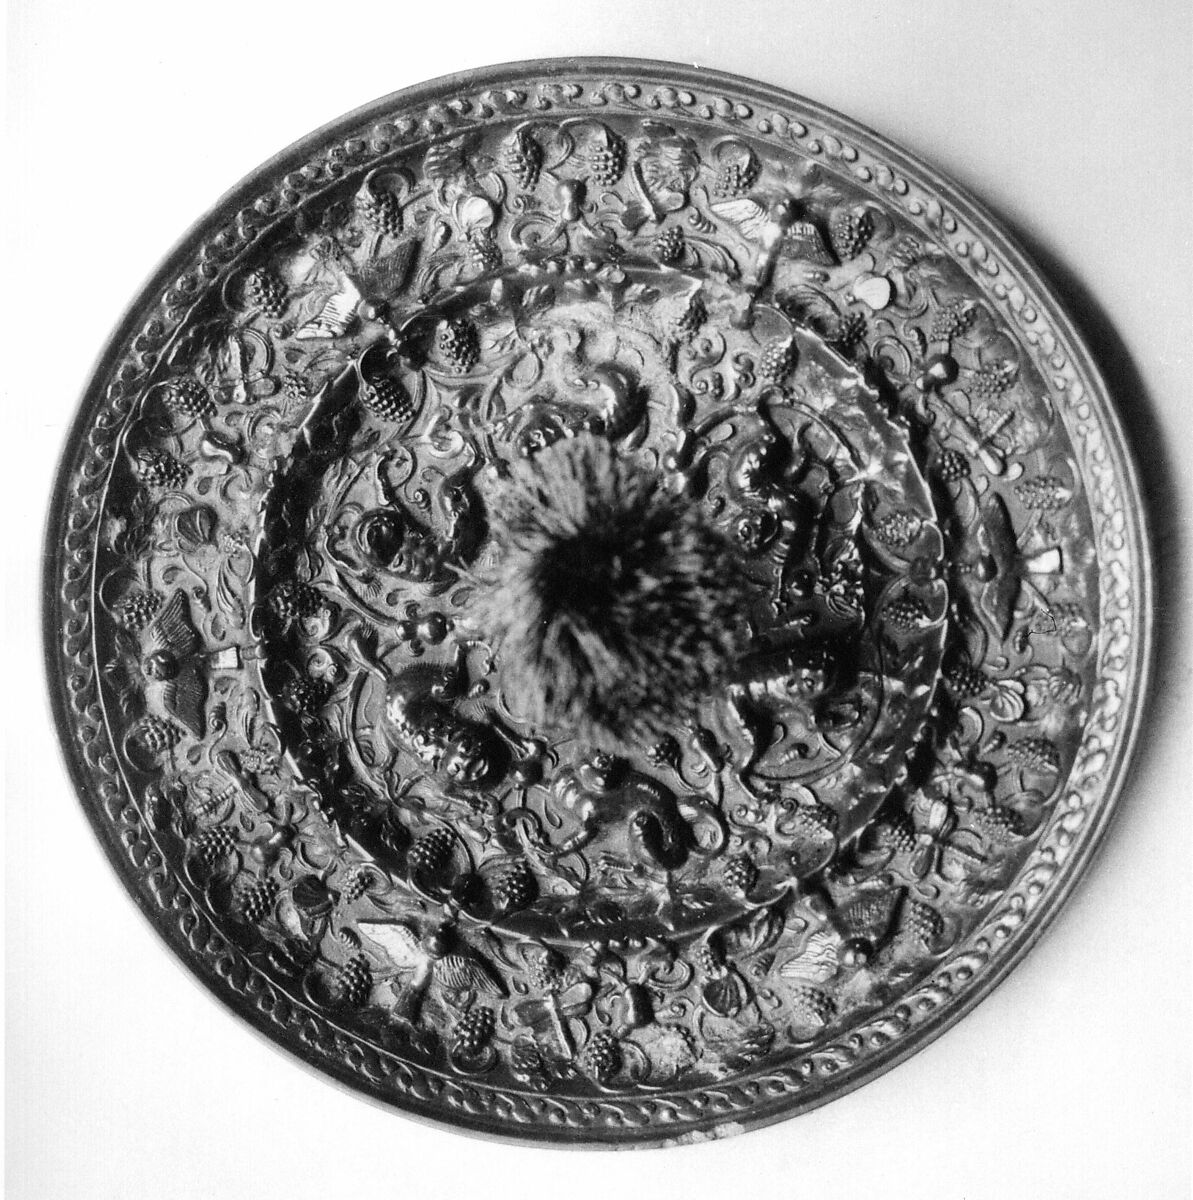 Mirror with birds and beasts amid grape vines, Bronze, China 